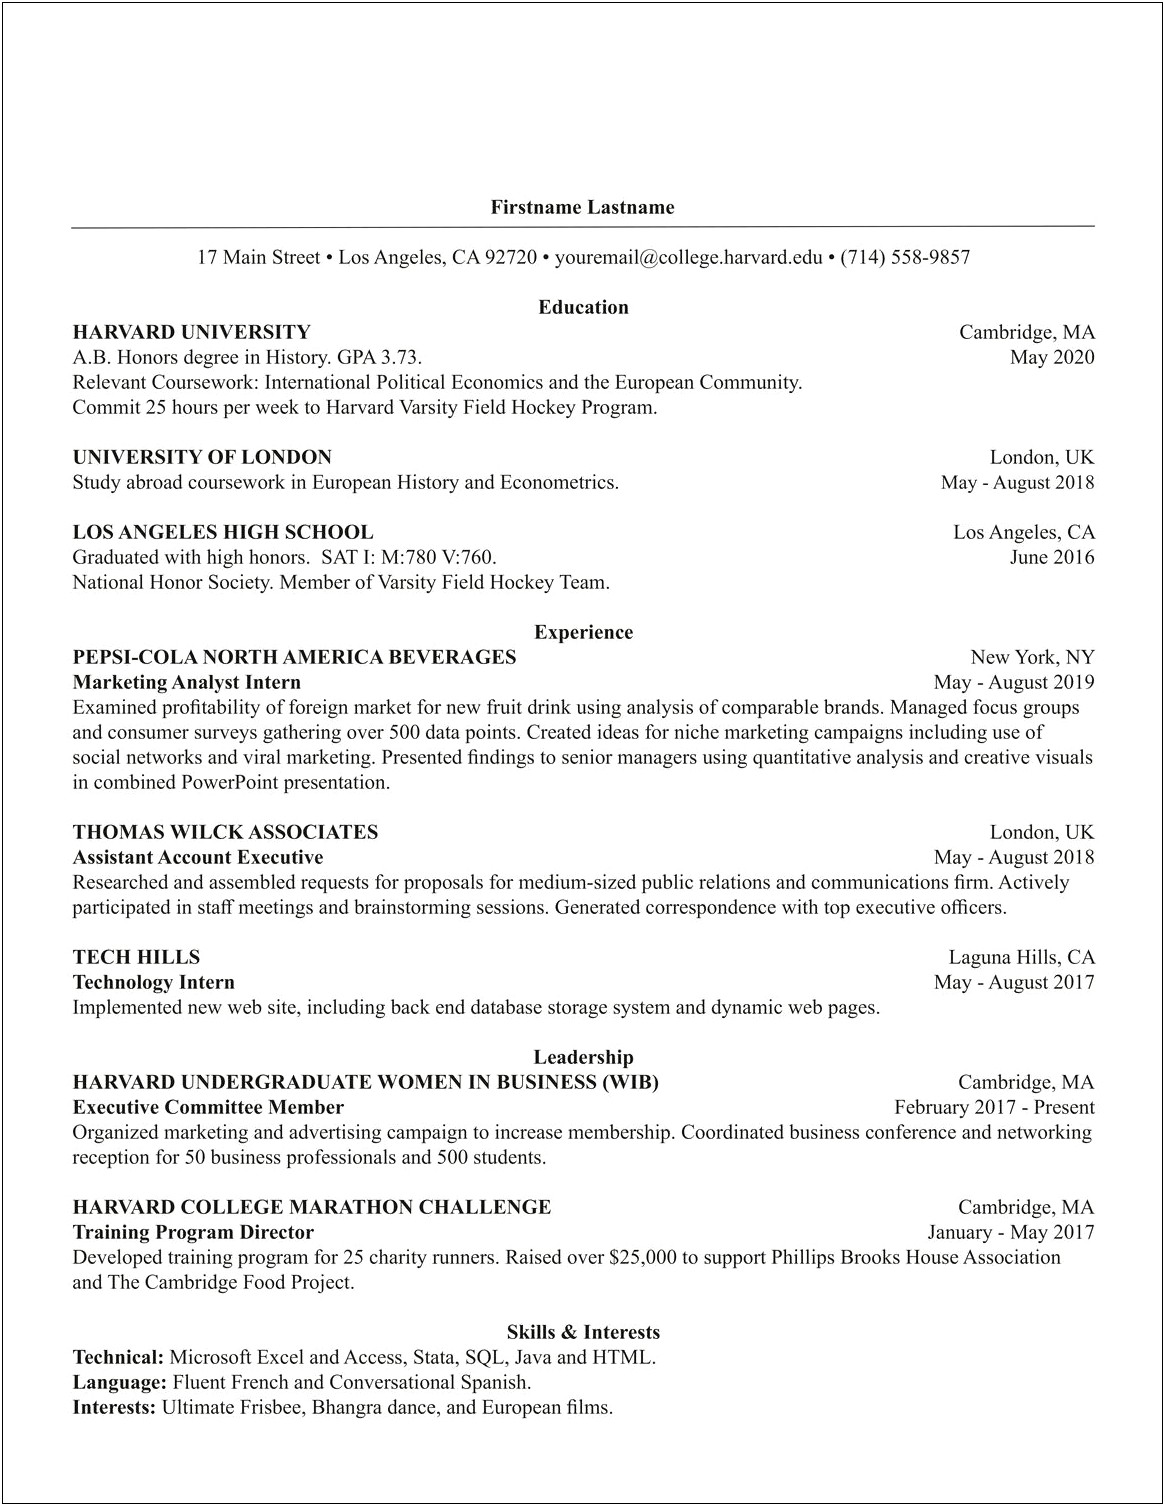 Time Warner Cable Field Technician Resume Sample